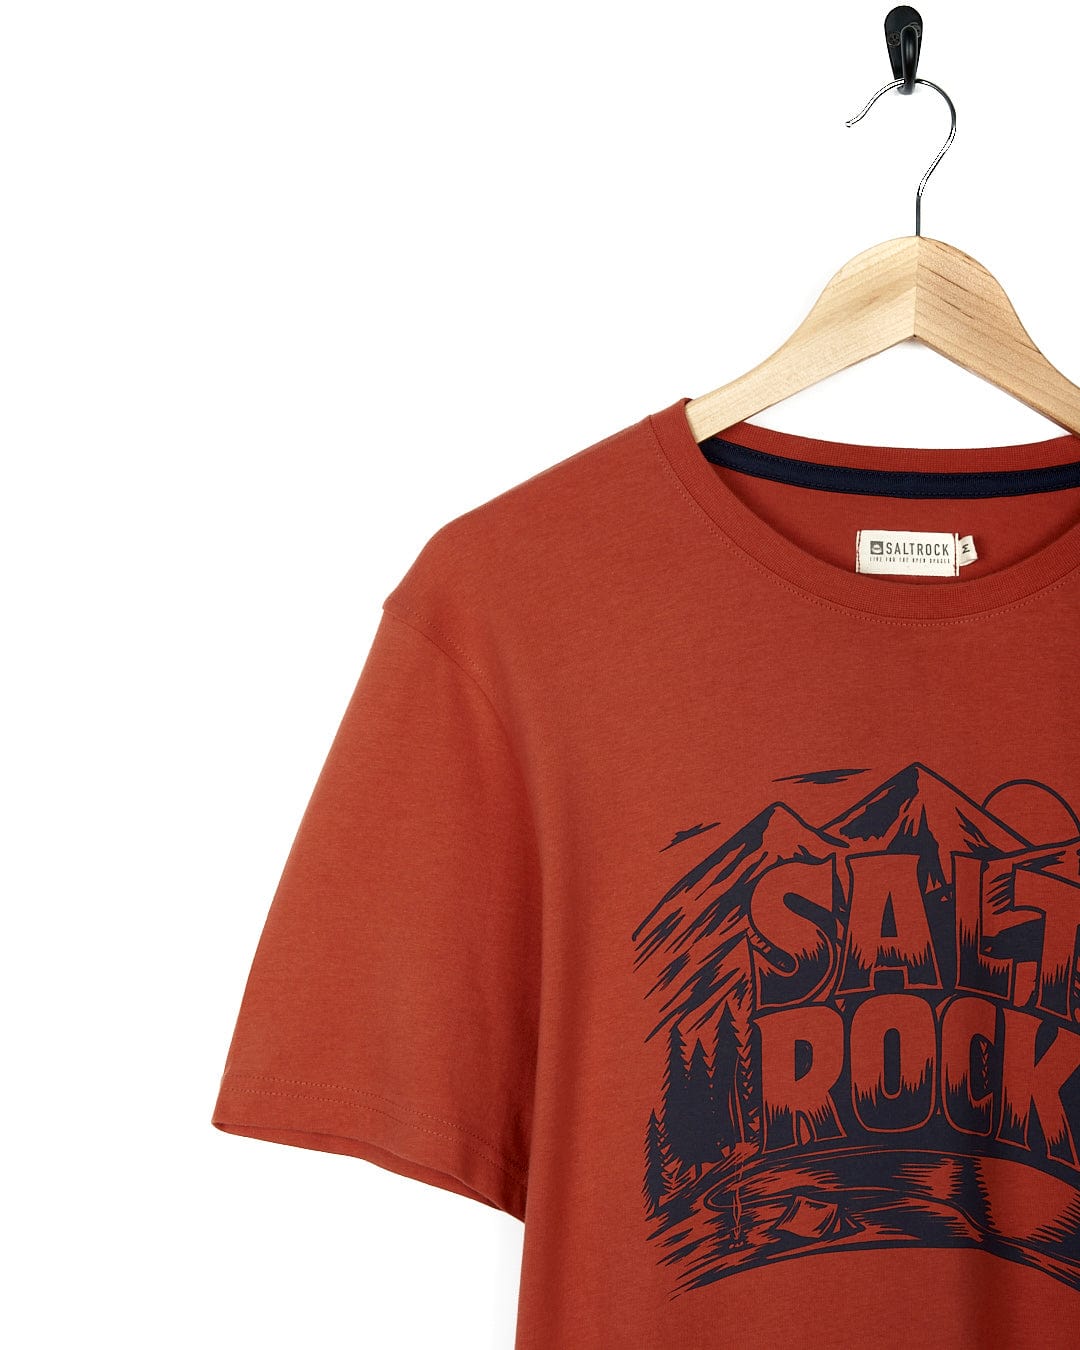 A stylish Wood Carve Logo - Mens Short Sleeve T-Shirt - Red by Saltrock with the words salt rock on it.